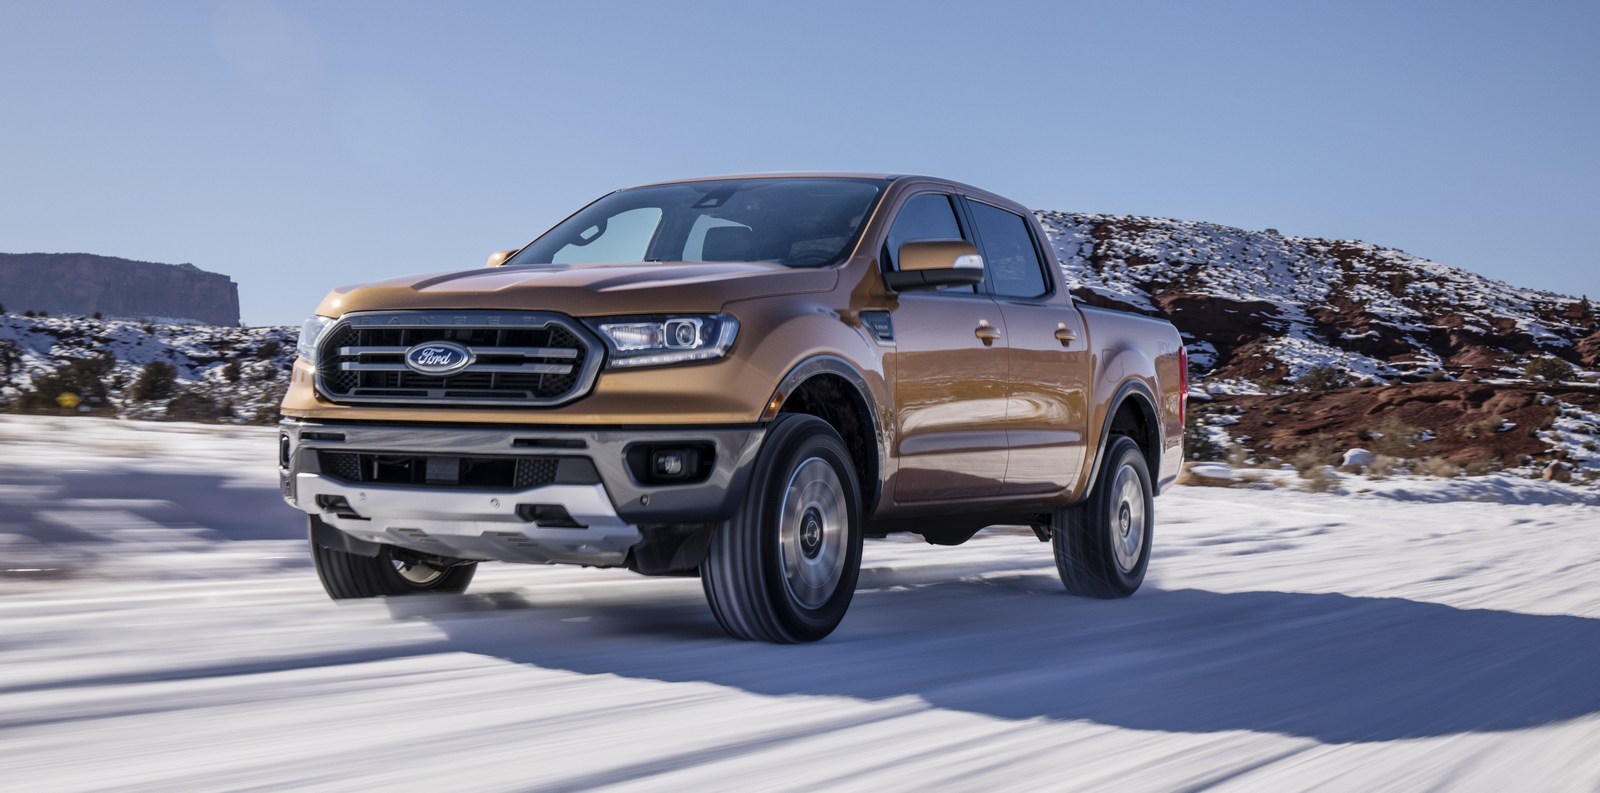 New Ford Ranger Raptor Coming to The UK in Early 2019 ...